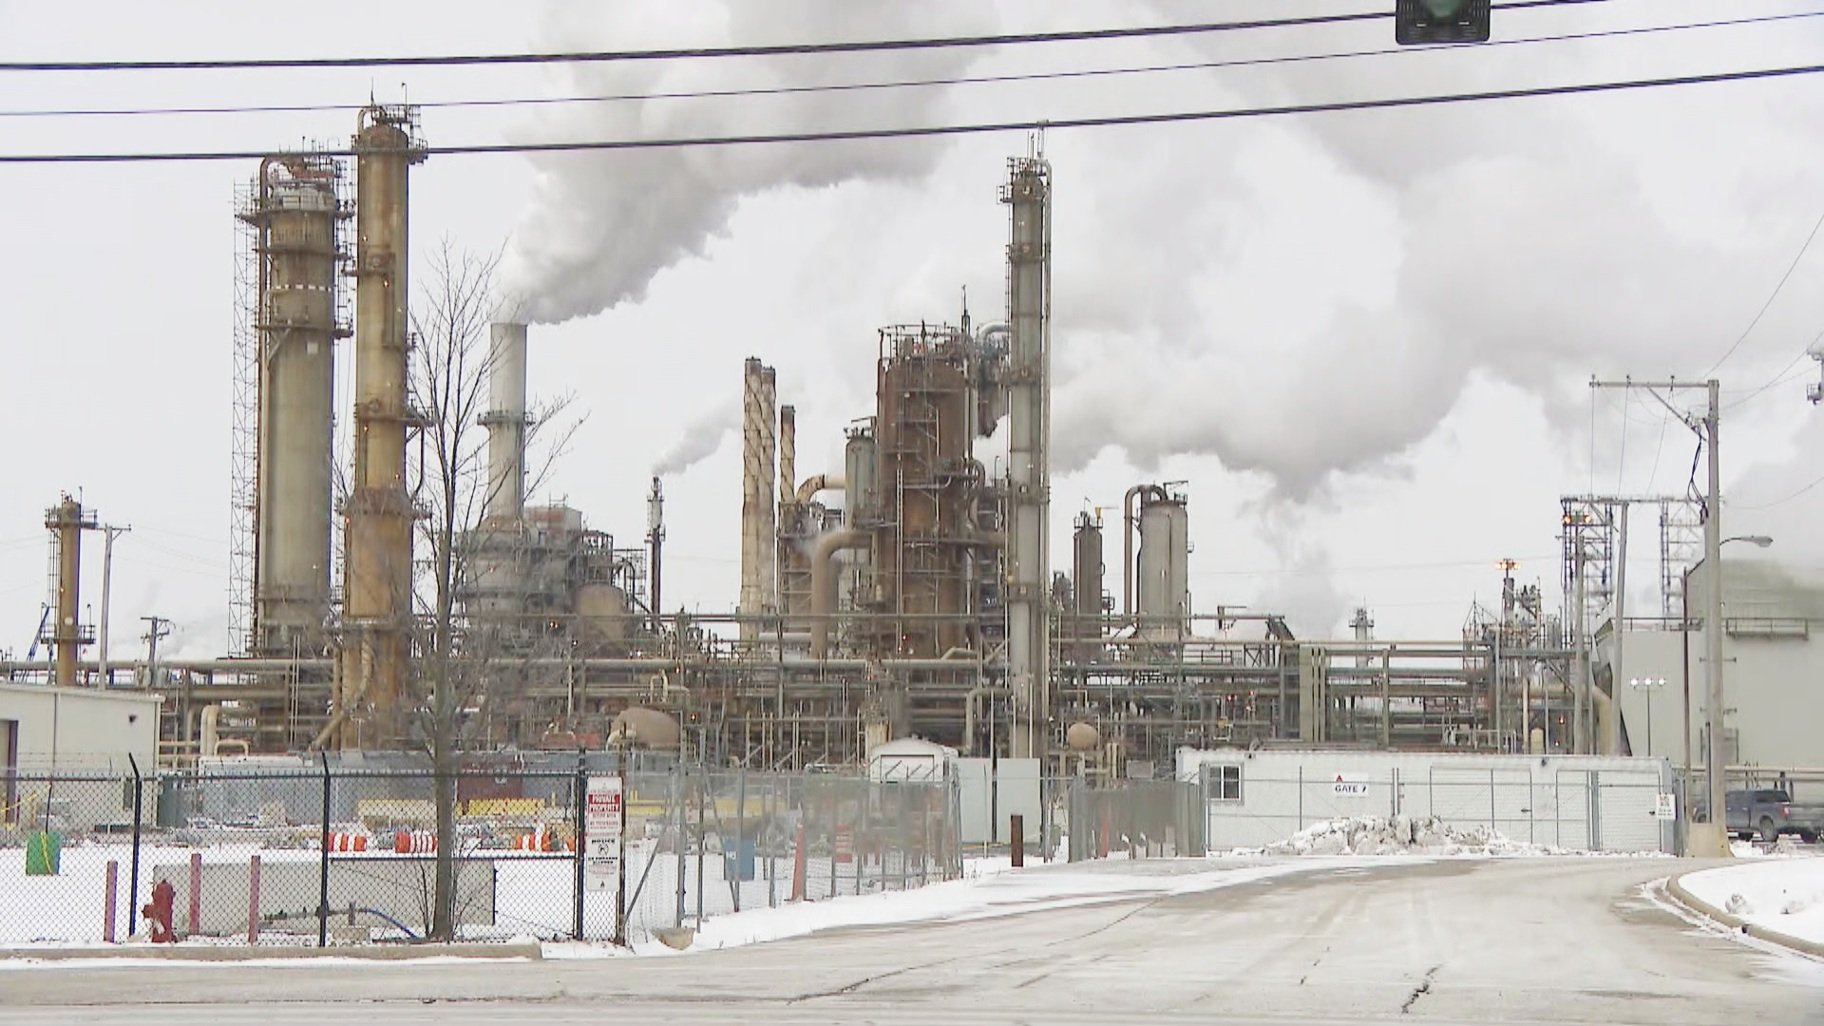 chicago-area-oil-refineries-among-worst-water-polluters-in-us-environmental-group-finds